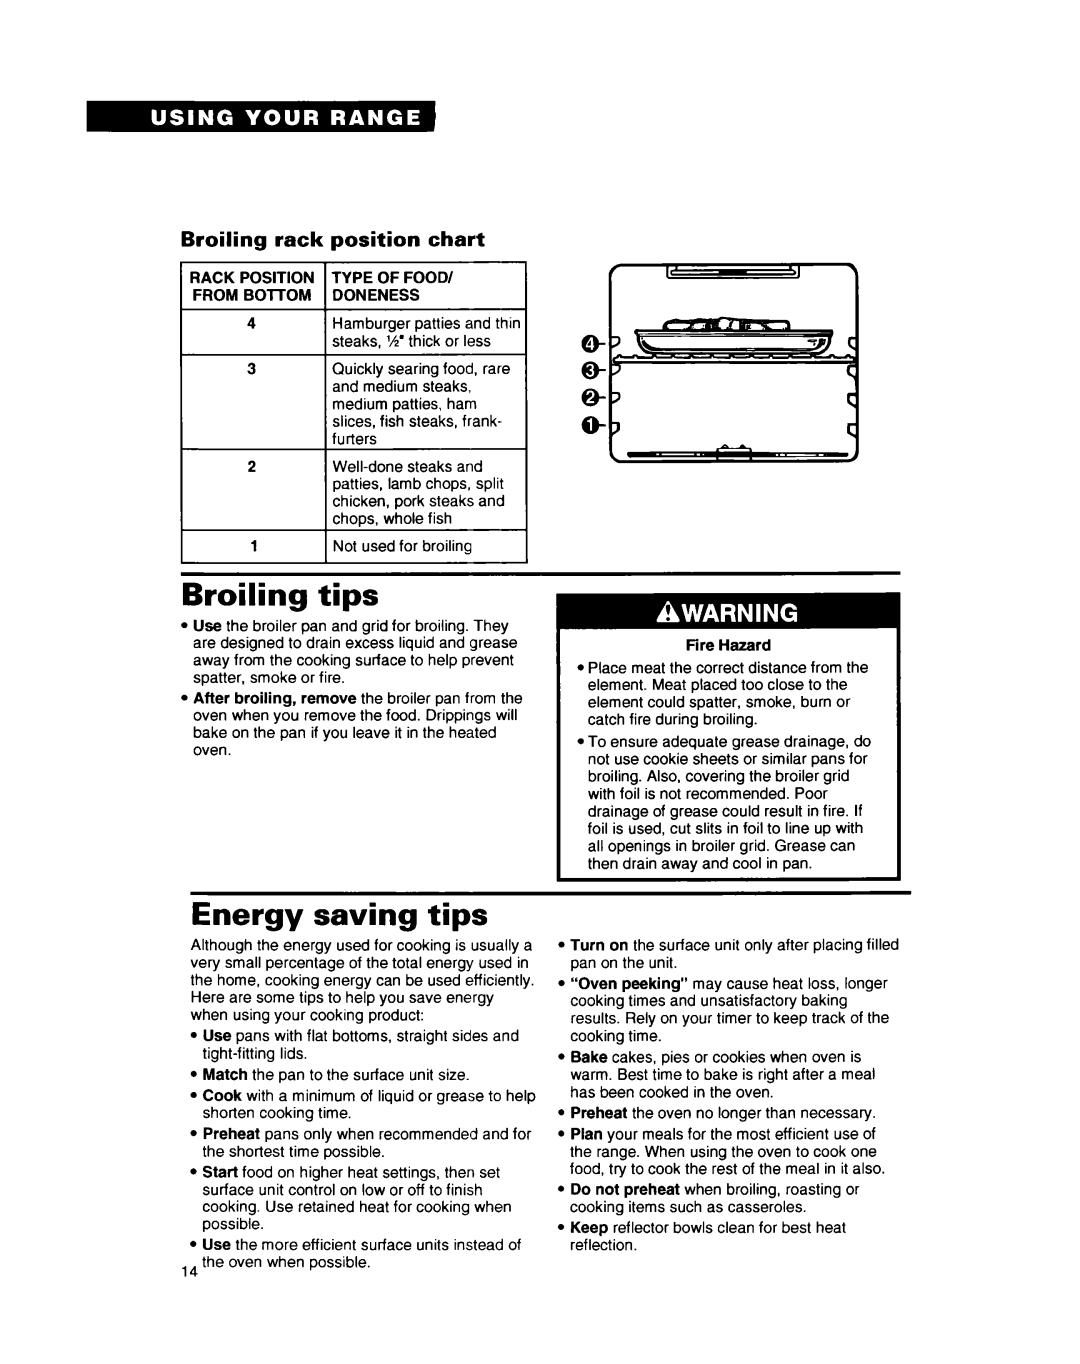 Whirlpool RS660BXB important safety instructions Broiling tips, Energy saving tips, Broiling rack position chart 